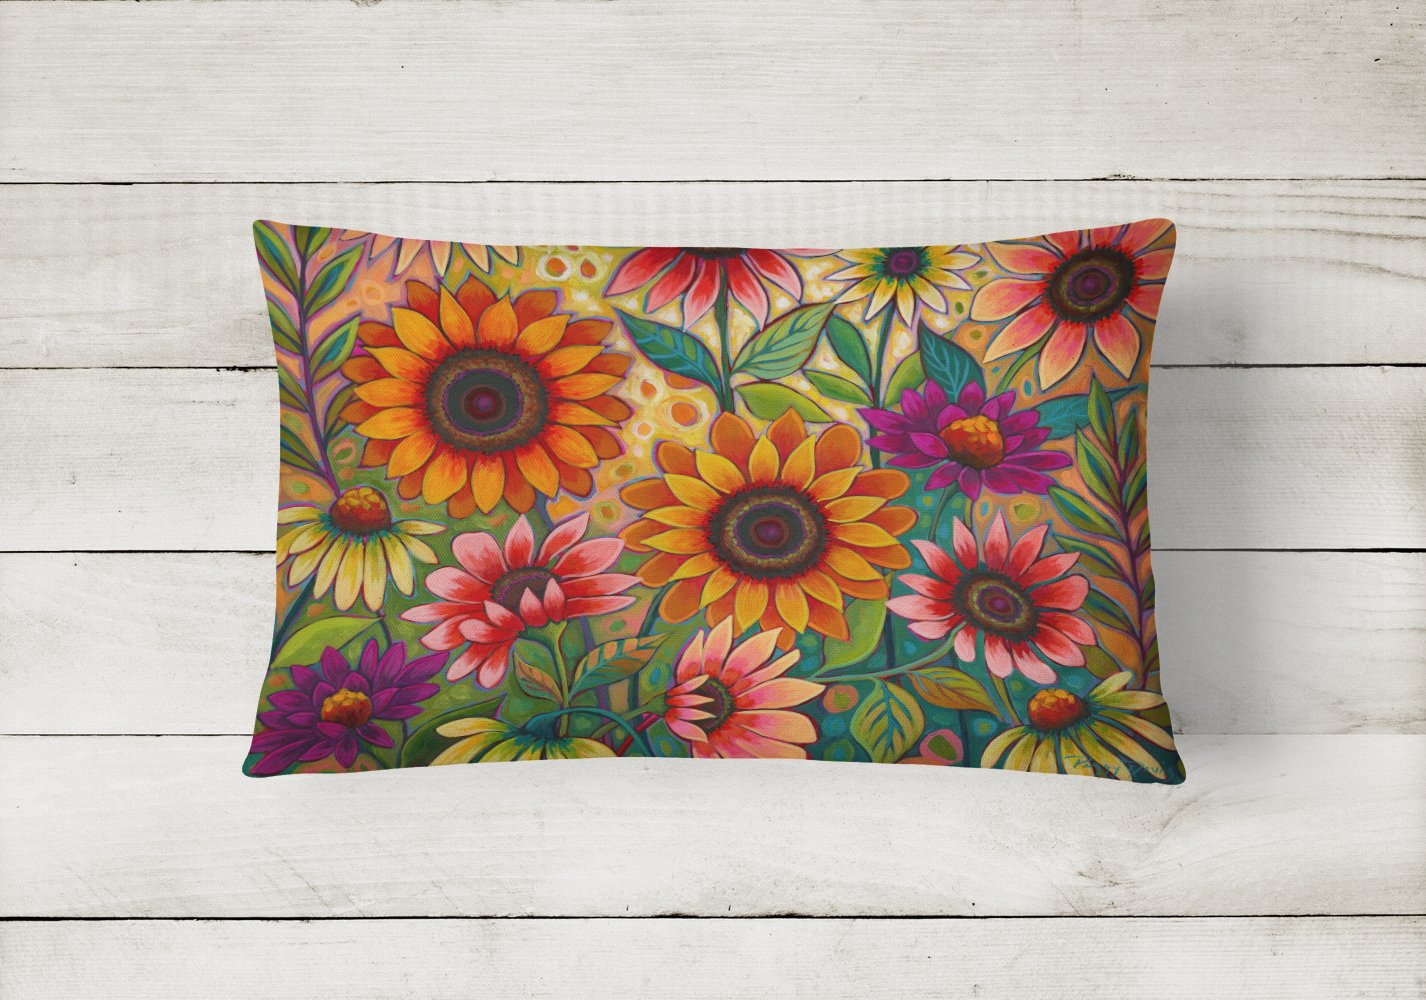 Fall Sunflower Surprise Canvas Fabric Decorative Pillow PPD3014PW1216 by Caroline's Treasures